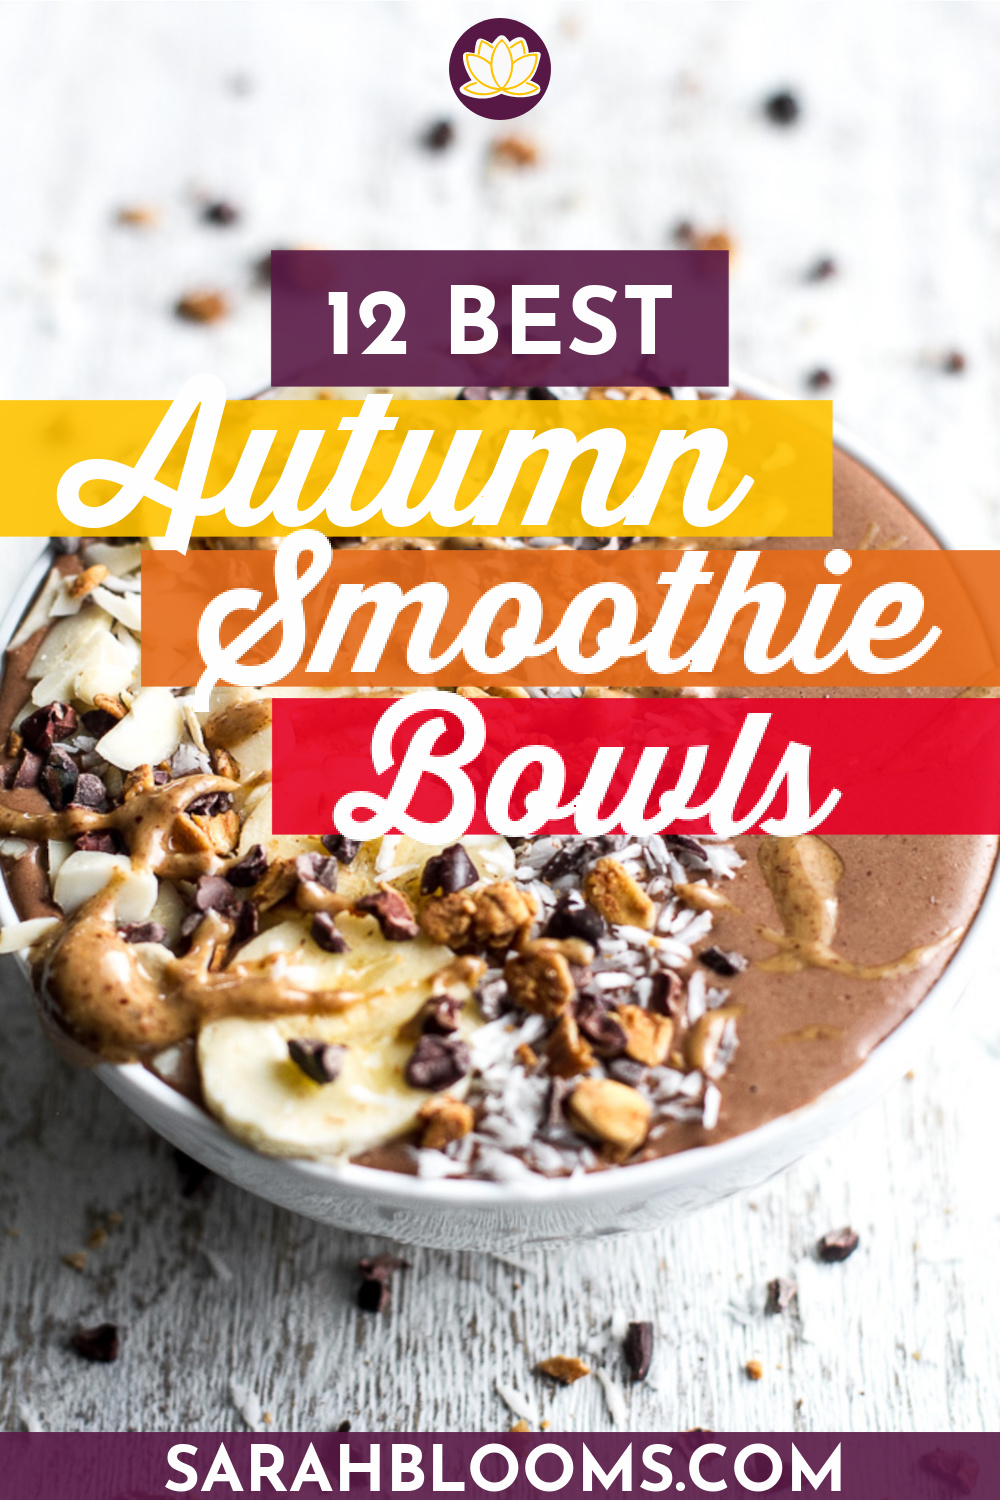 Enjoy healthy smoothies when it's cold outside with these 12 Best Warming Smoothie Bowls perfect for fall and winter! These 12 Easy and Delicious Warming Smoothie Bowls will help you eat healthy when it's cold outside. #smoothiebowls #smoothiebowlrecipes #warmingsmoothiebowls #warmingsmoothiebowlrecipes #healthybreakfasts #smoothierecipes